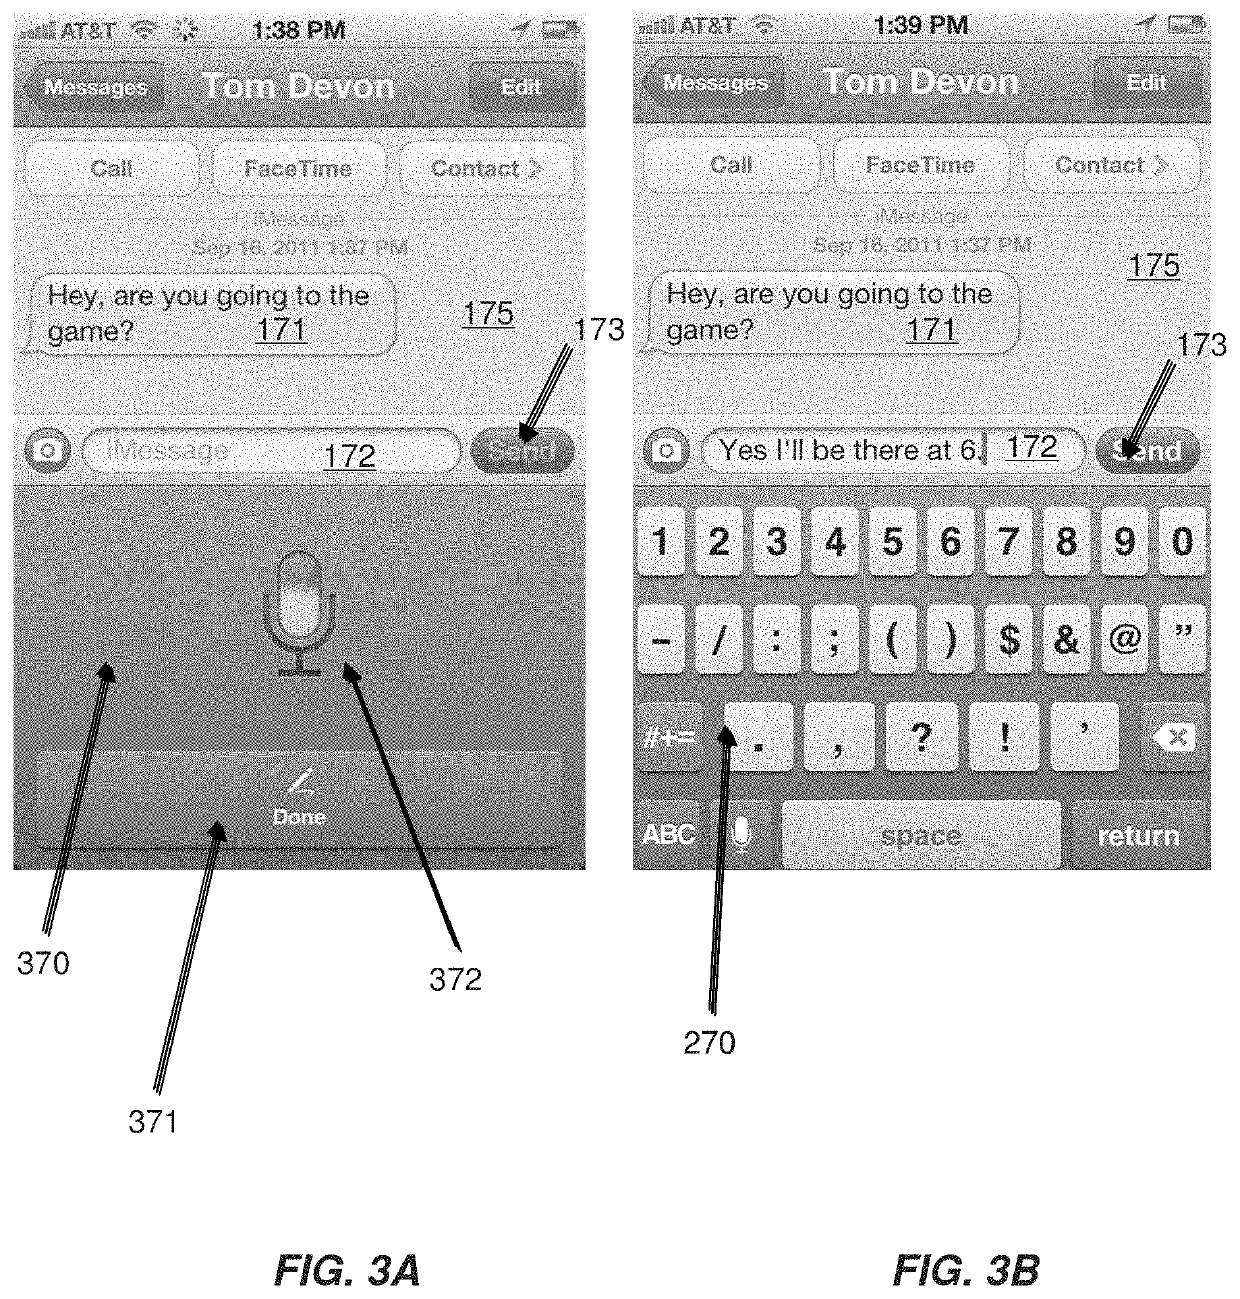 Automatically adapting user interfaces for hands-free interaction